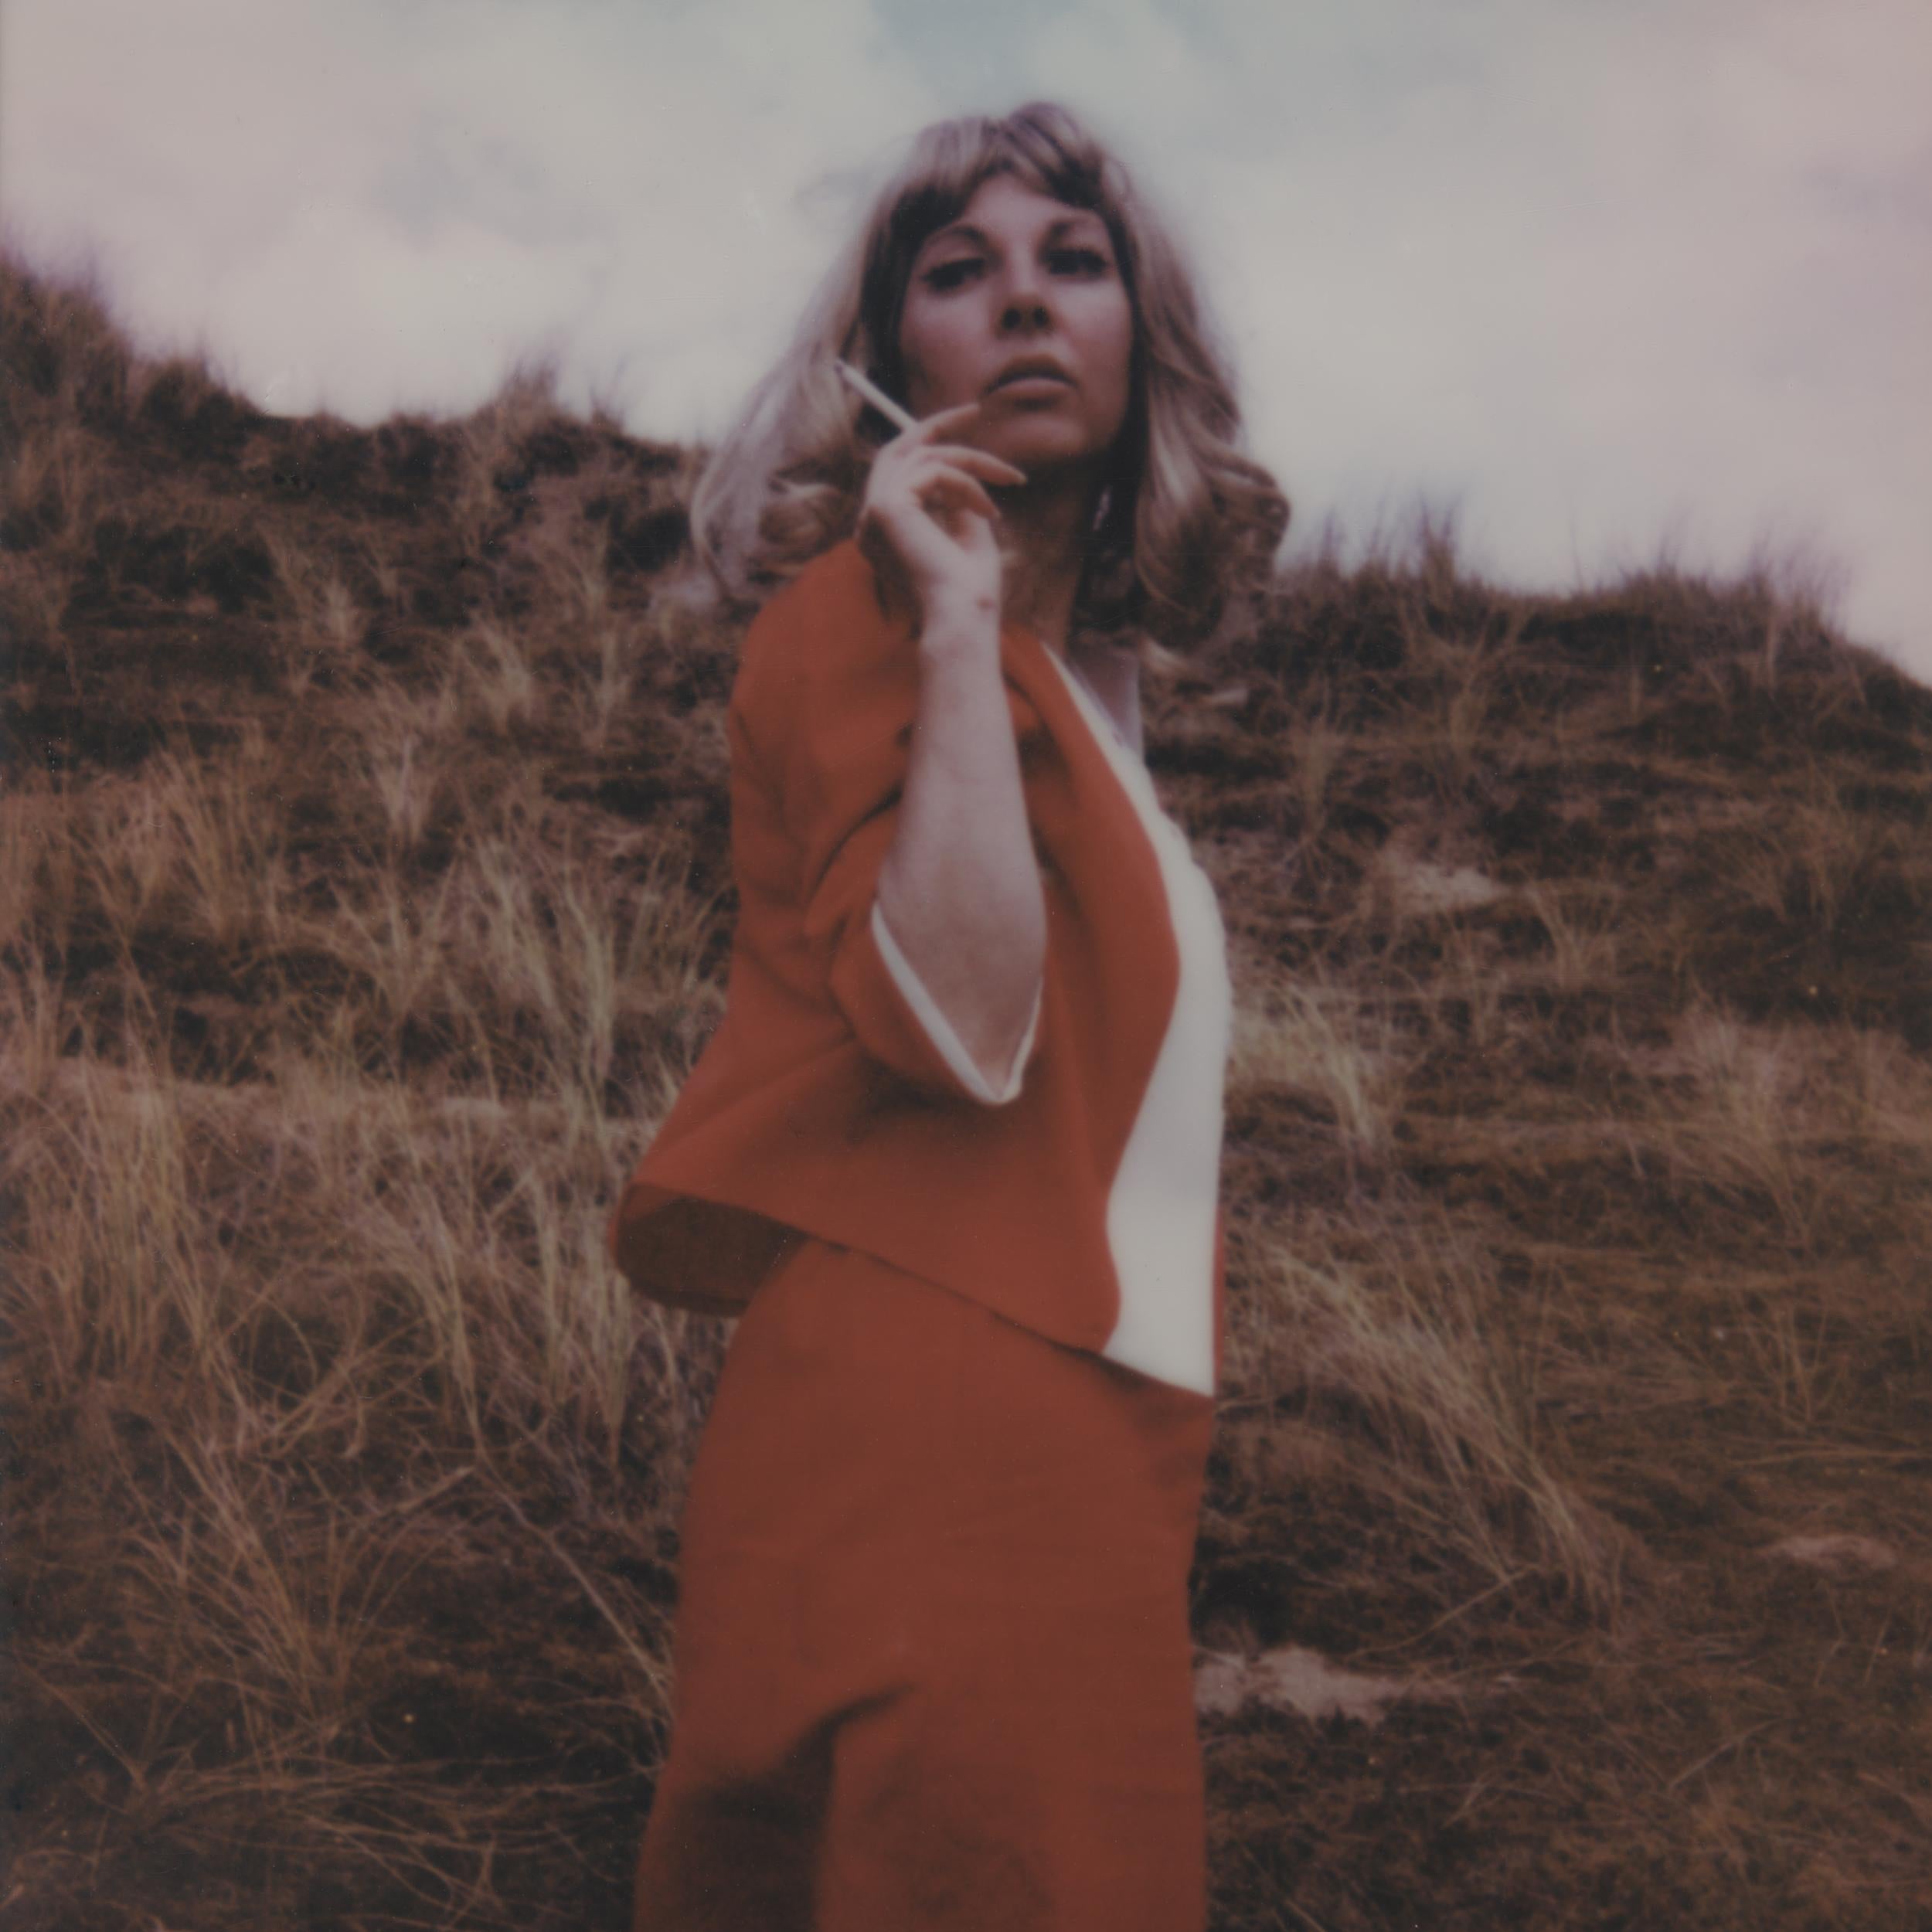 Heart Stopped (at 3pm) - Contemporary, Polaroid, Woman, 21st Century